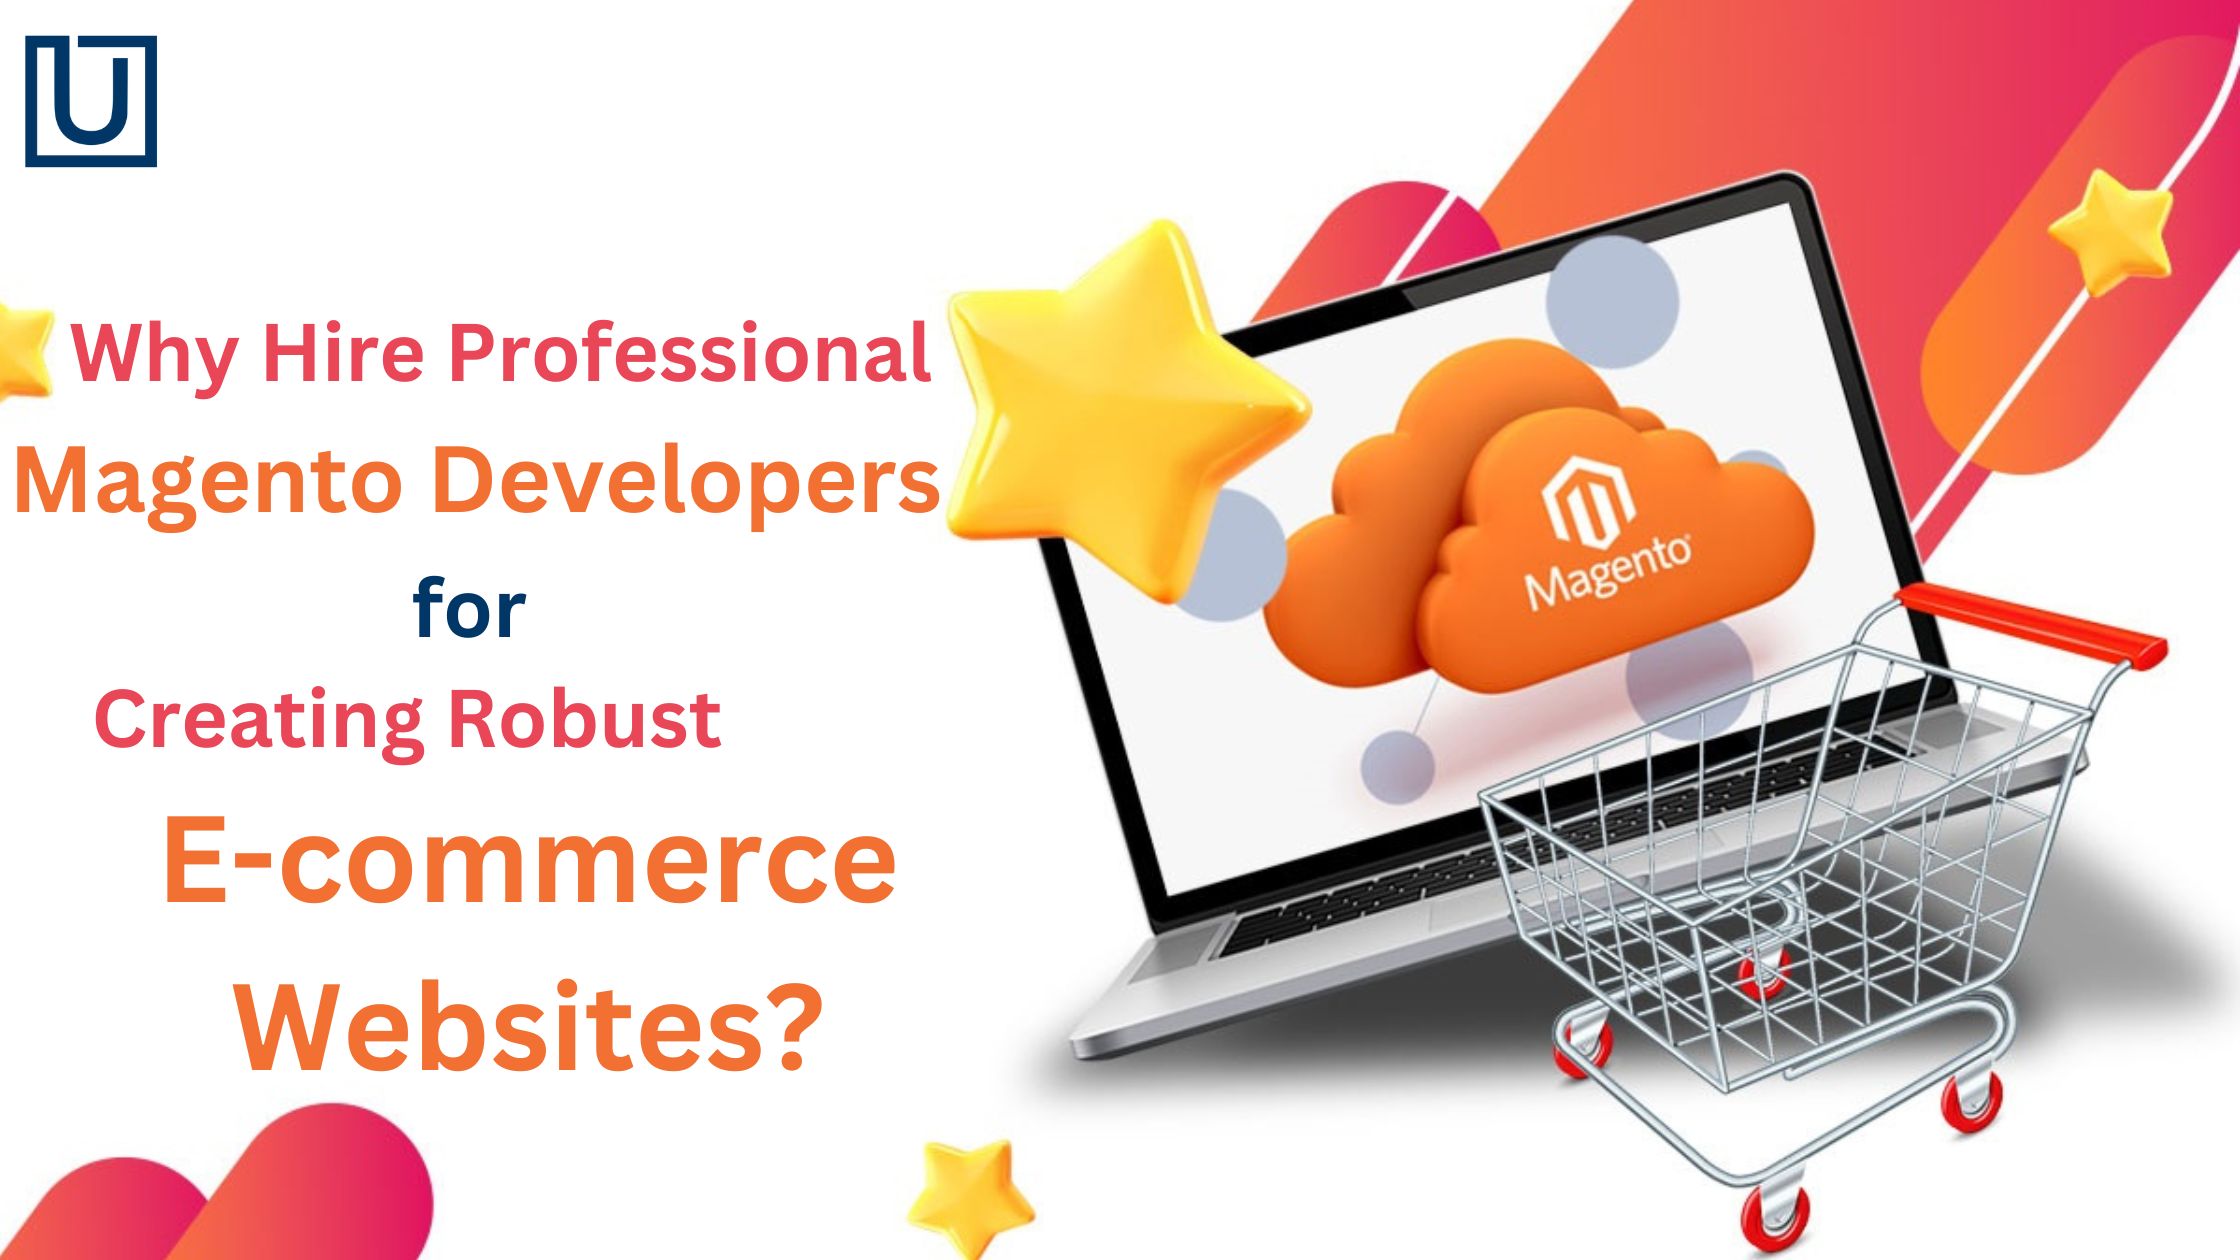 Why Hire Professional Magento Developers for Creating Robust E-commerce Websites?